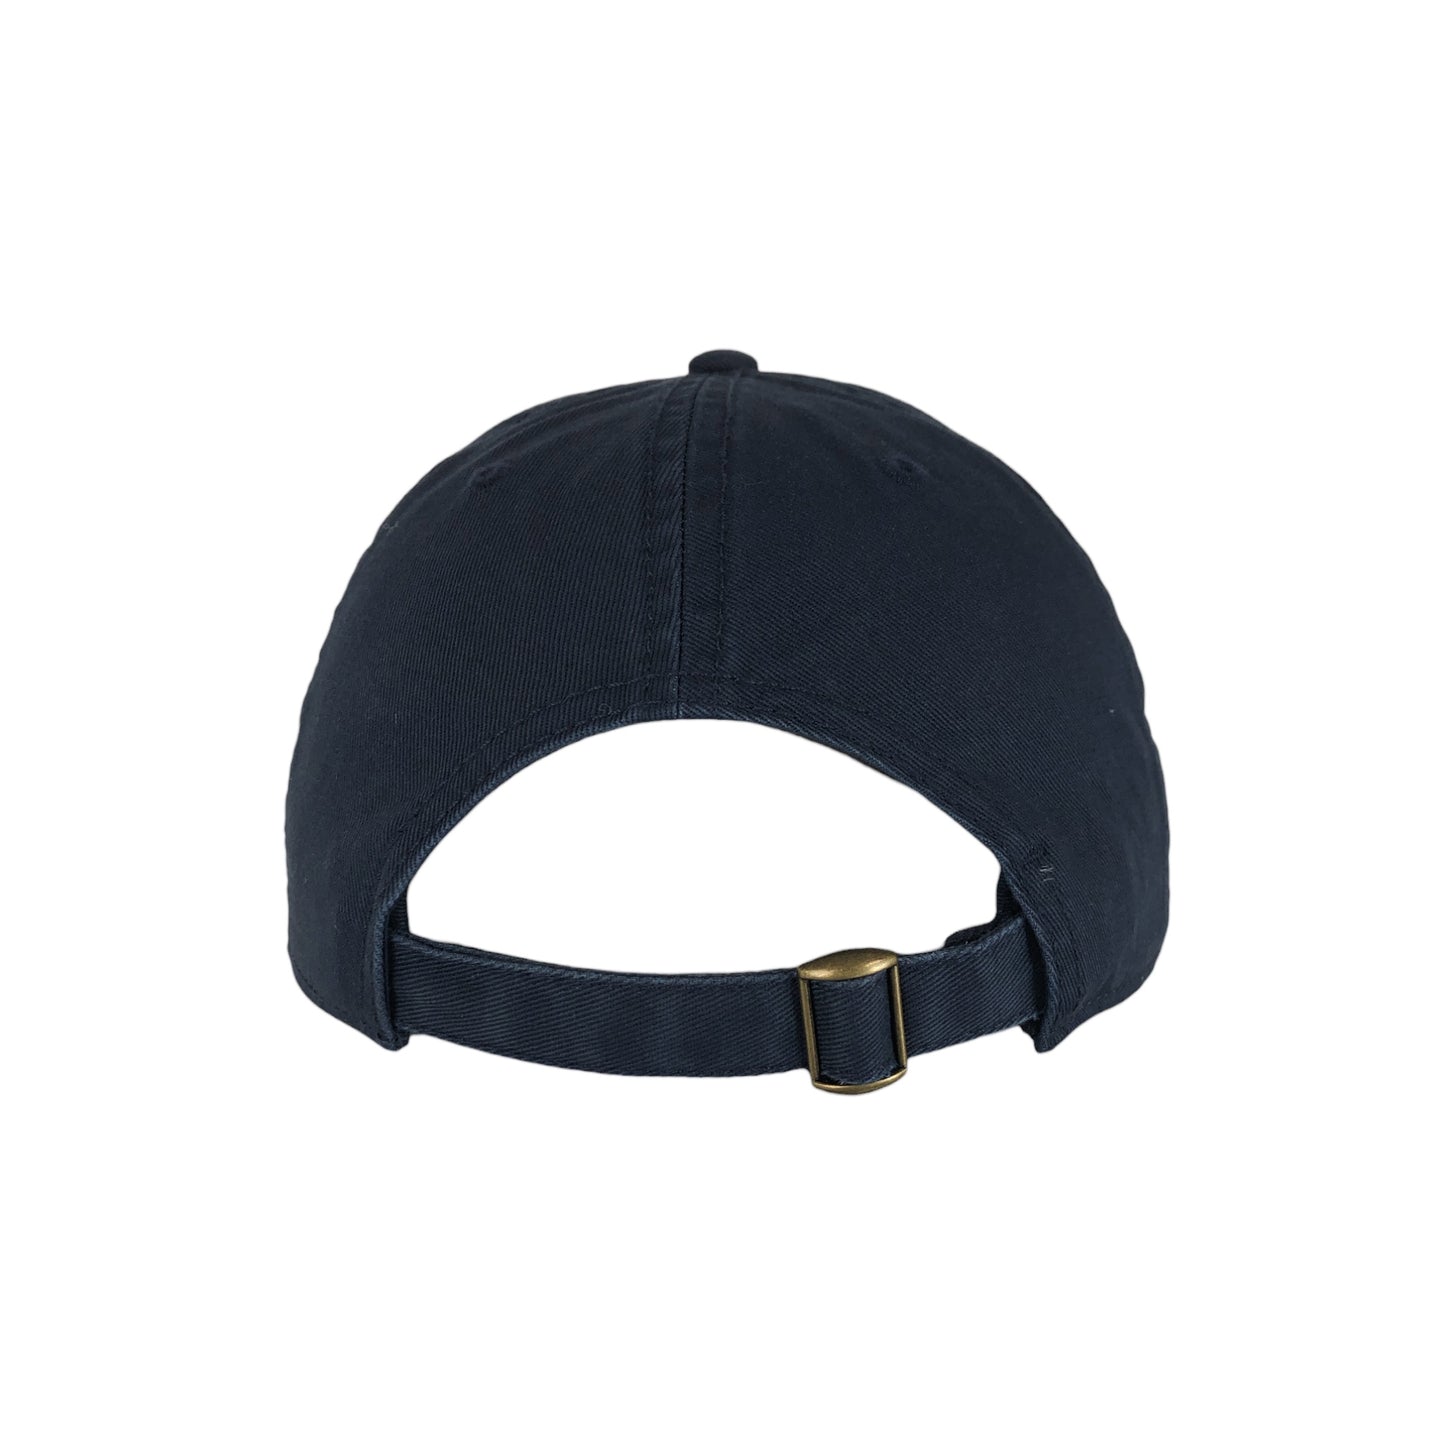 Back of the DubSea Fish Sticks navy blue relaxed fit dad hat, with adjustable strap.